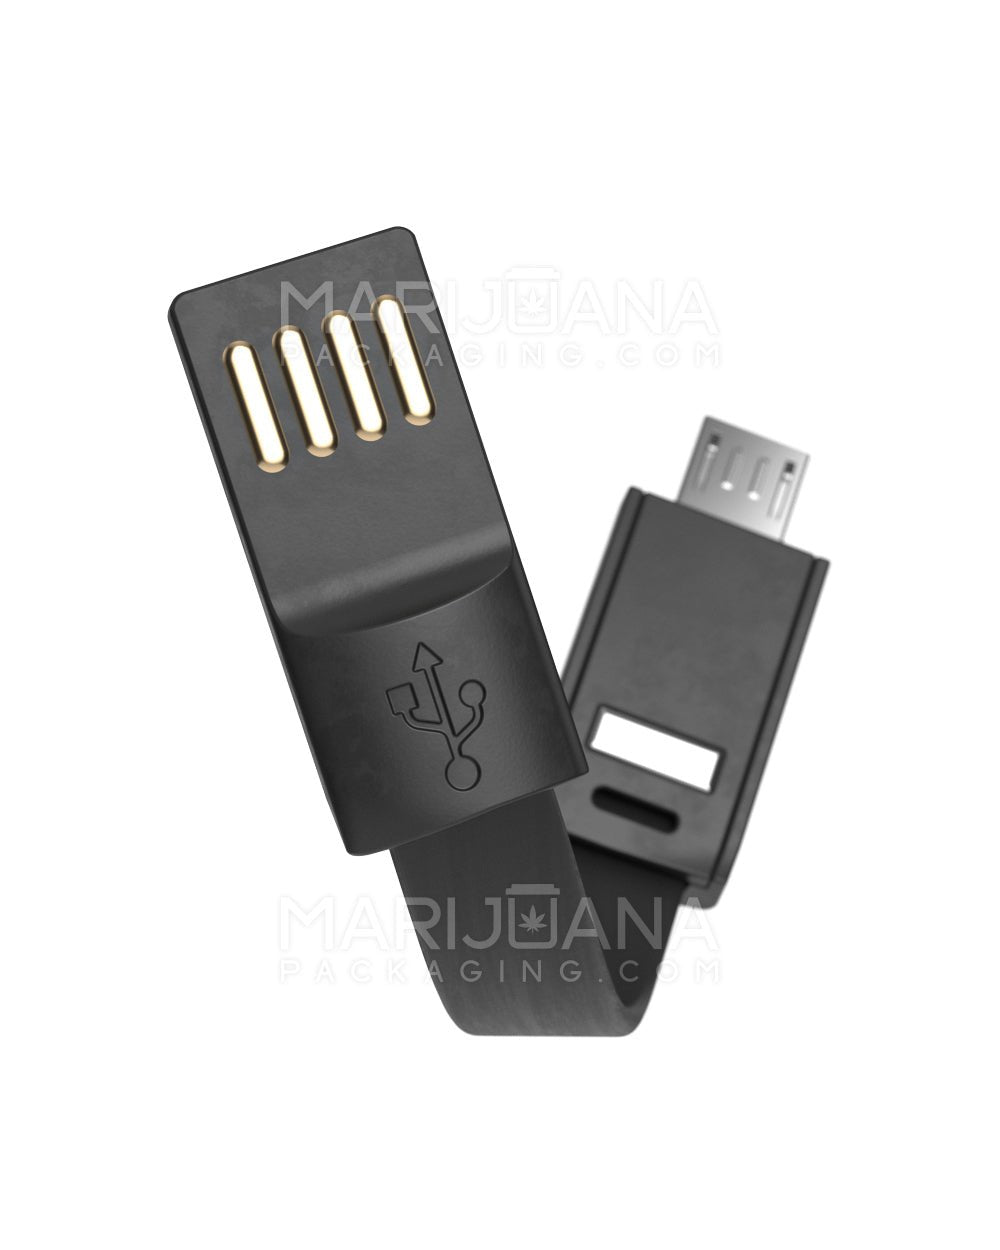 Vaporizer 3.5" USB to Micro USB Connection Cable | Black - 100 Count - 7